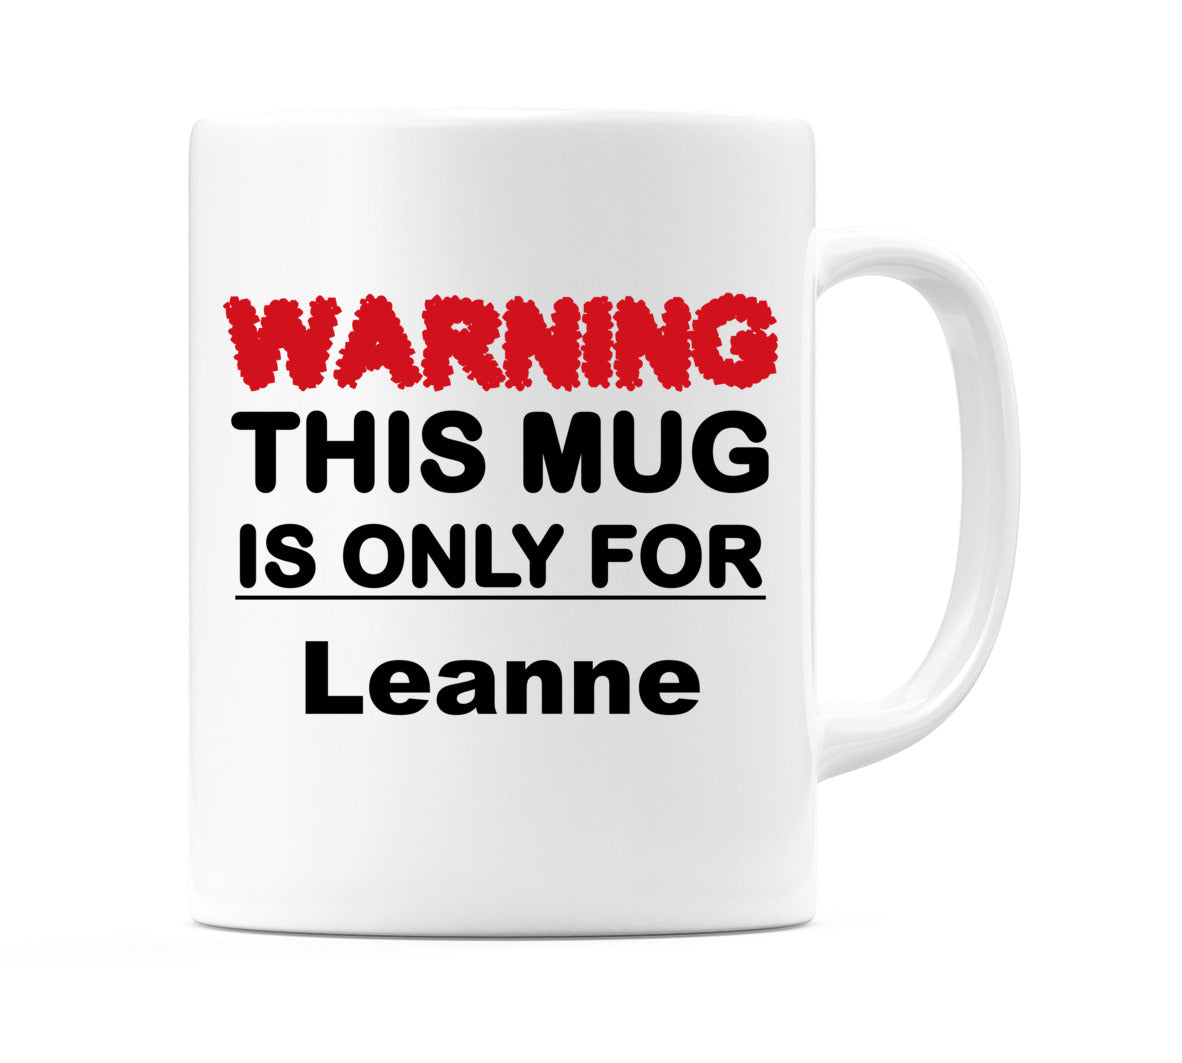 Warning This Mug is ONLY for Leanne Mug